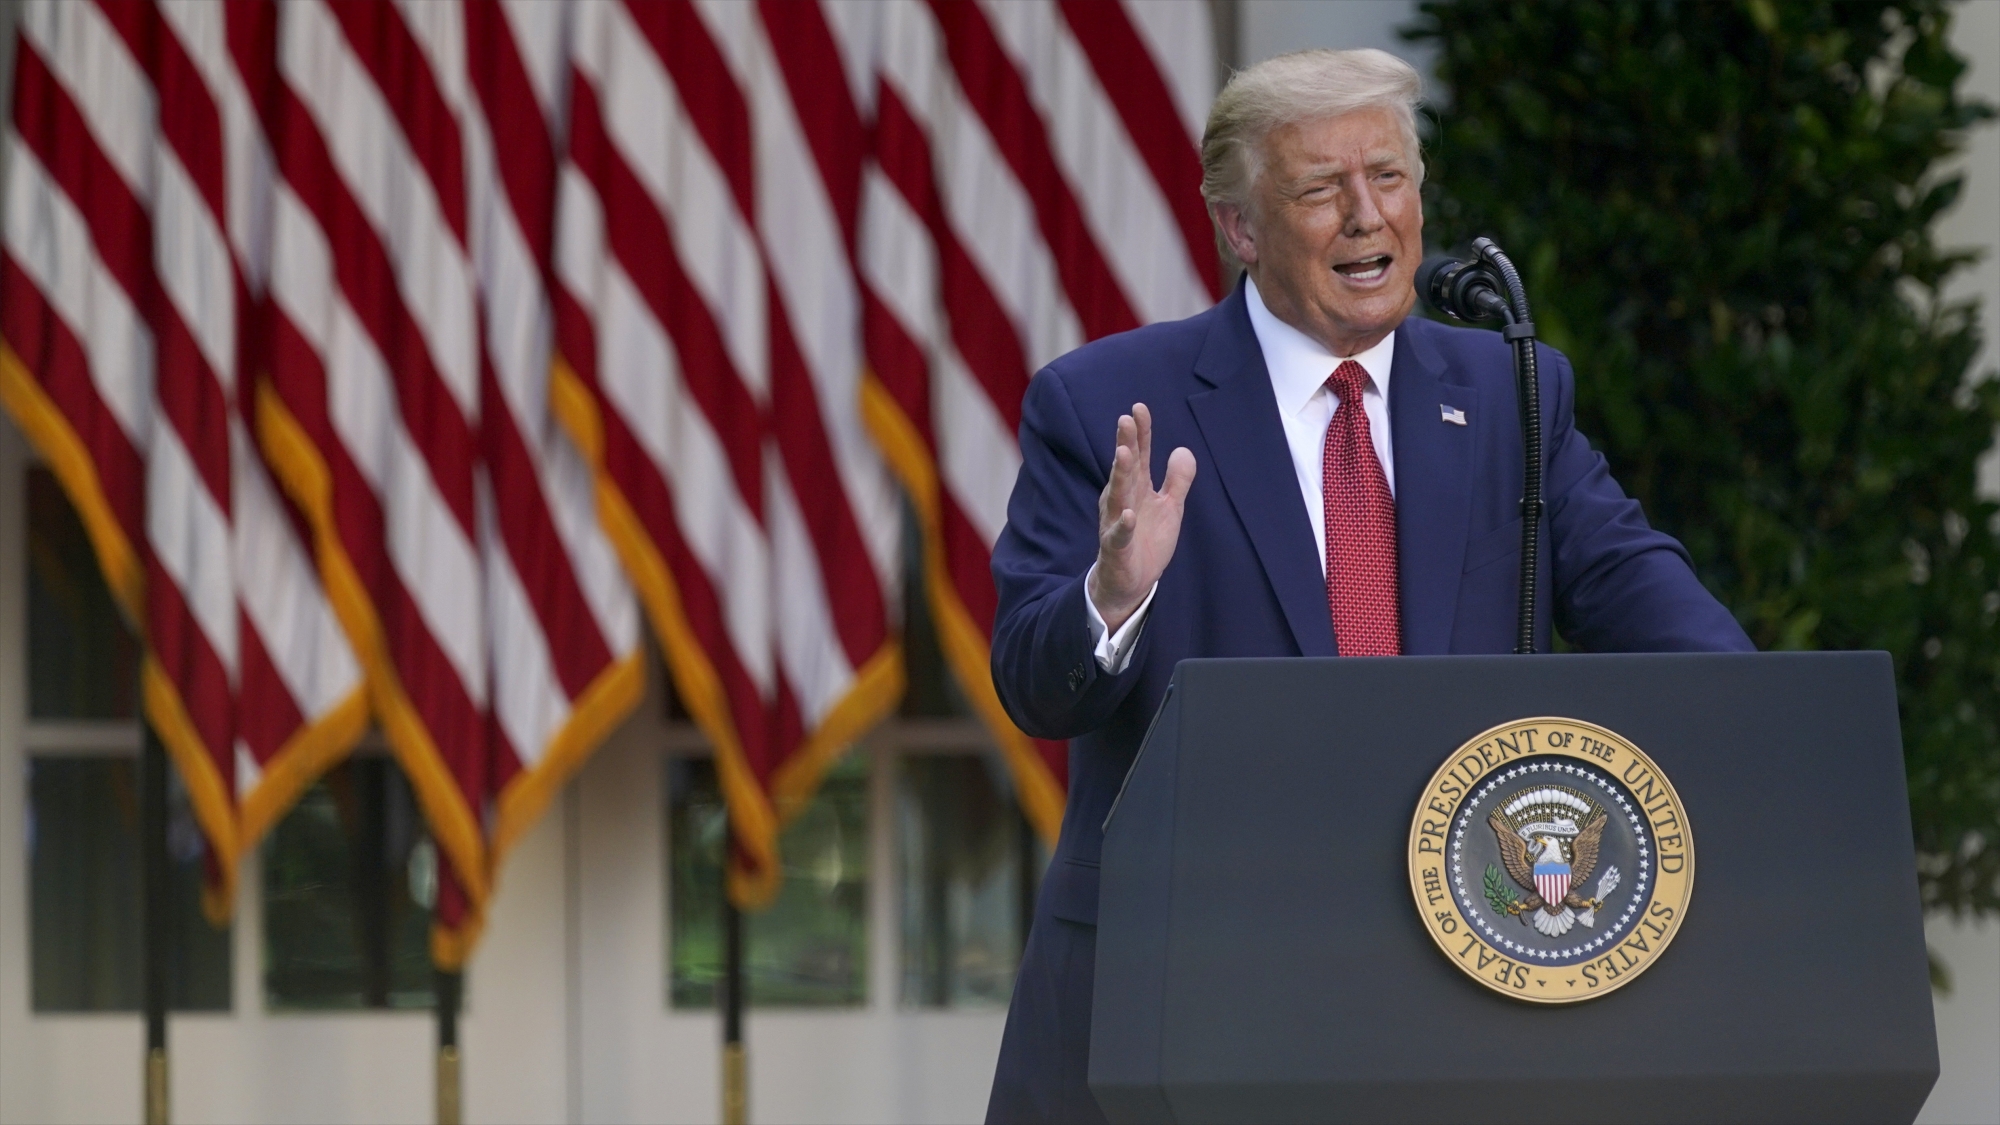 President Donald Trump speaks during a news conference in the Rose Garden of the White House, Tuesday, July 14, 2020, in Washington. (AP Photo/Evan Vucci) Donald Trump ArcInfo